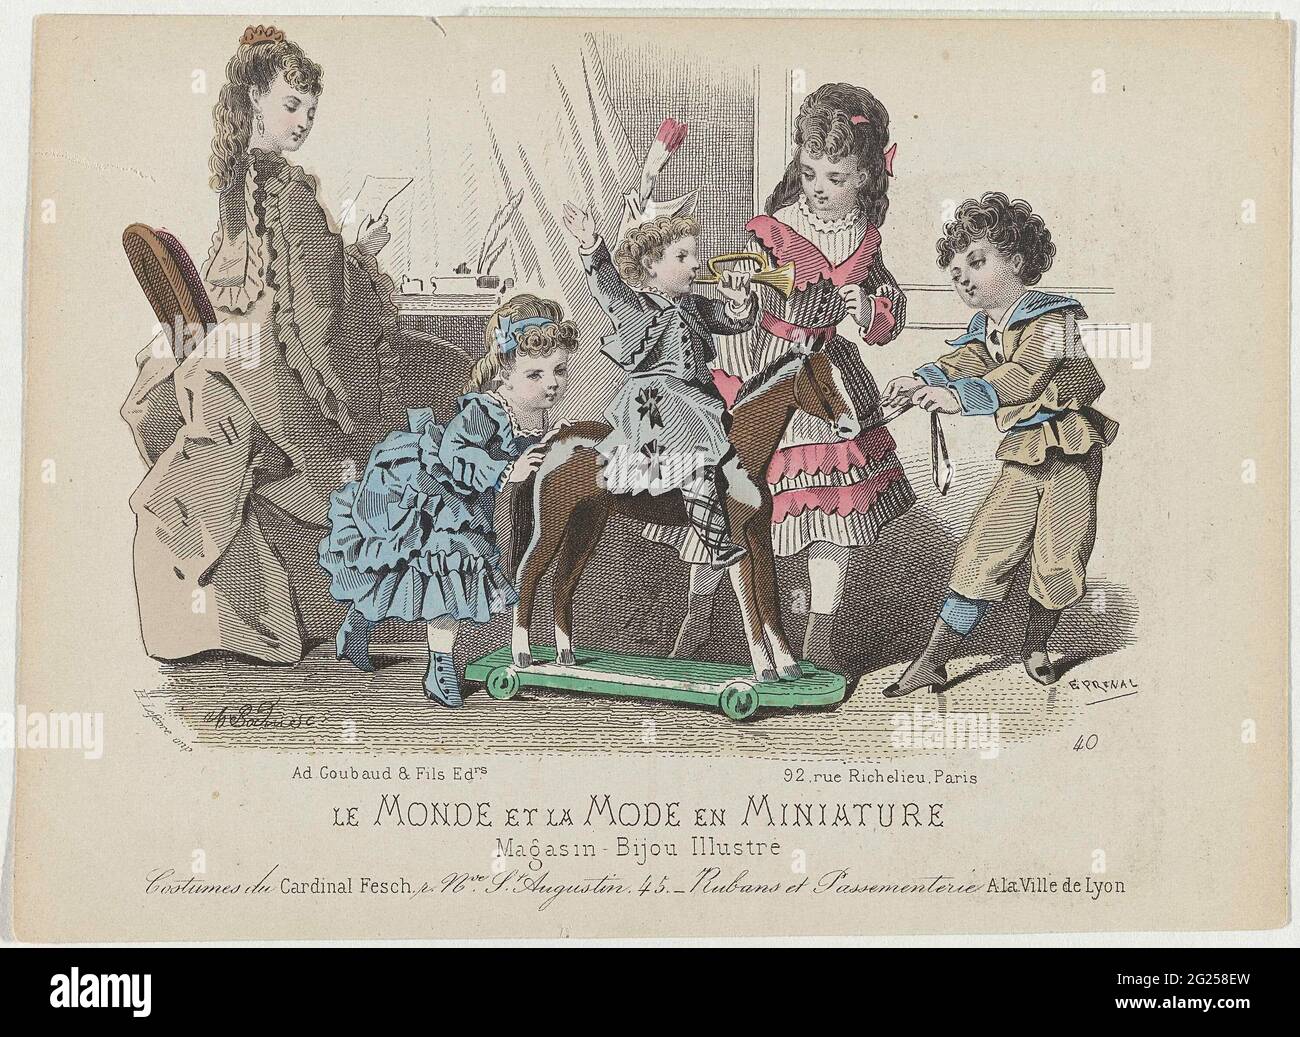 Le Monde Et La Fashion And Miniature 1873 No 40 Costumes Du Cardinal Fesch A Woman And Four Children In Interior The Boy Is Dressed In A Sailor Suit The Girls